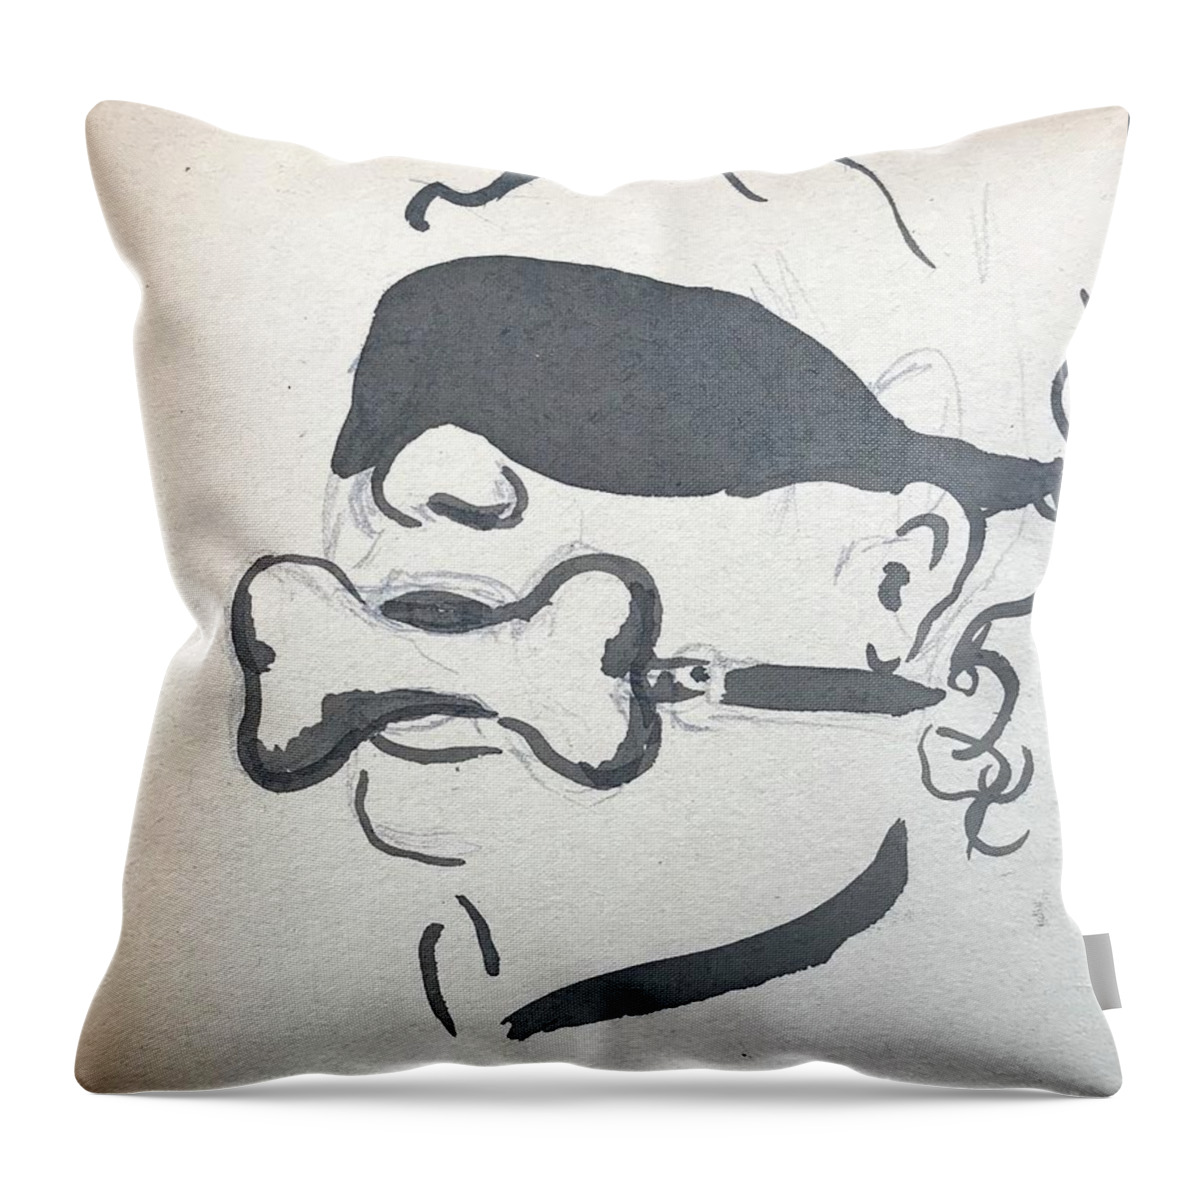 Sumi Ink Throw Pillow featuring the drawing Good Puppy by M Bellavia